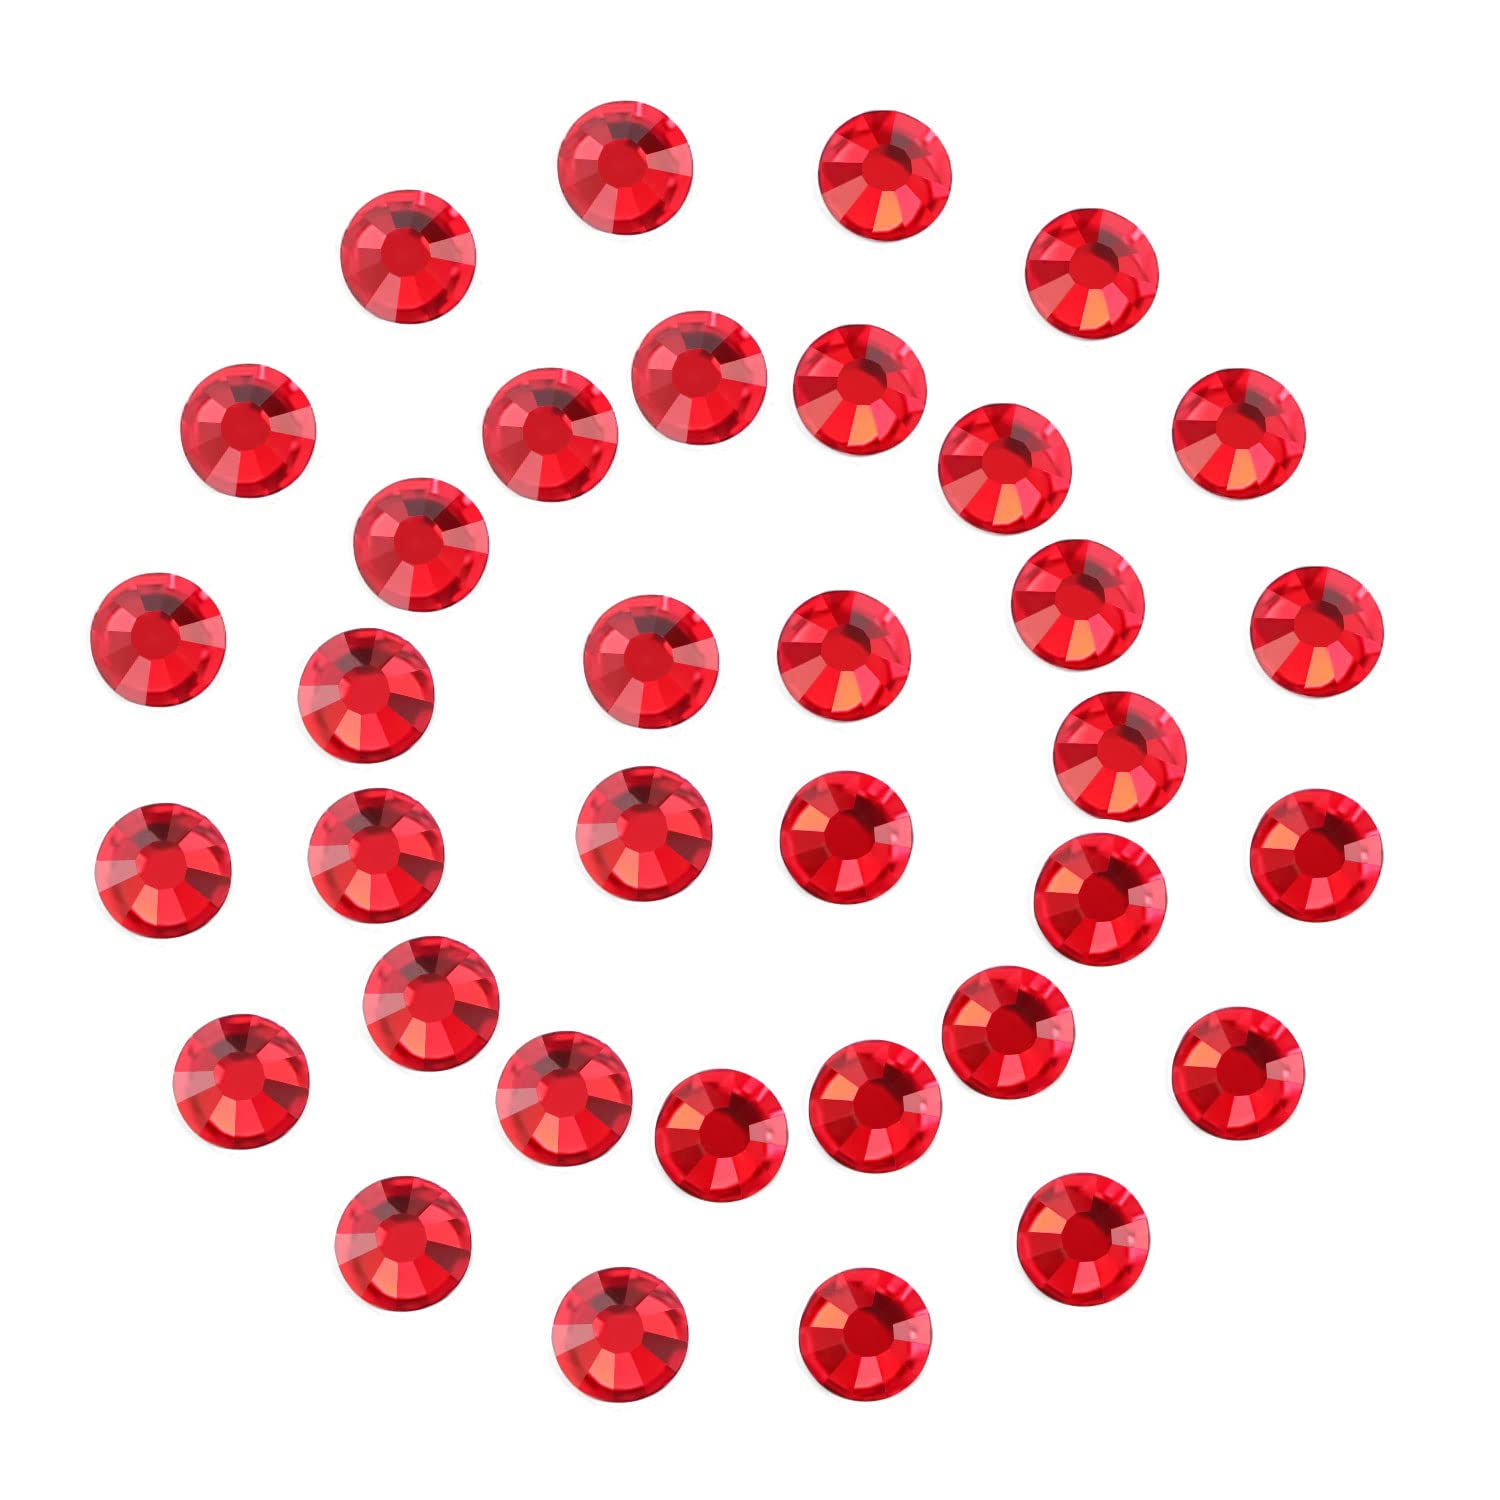 1440Pcs Ruby Red Crystal Rhinestones,Glass Flatback Rhinestones Gemstones  for Nail Face Makeup Art Crafts Clothes Decoration -(SS12,3.0mm,Ruby Red)  SS12/1440Pcs Red